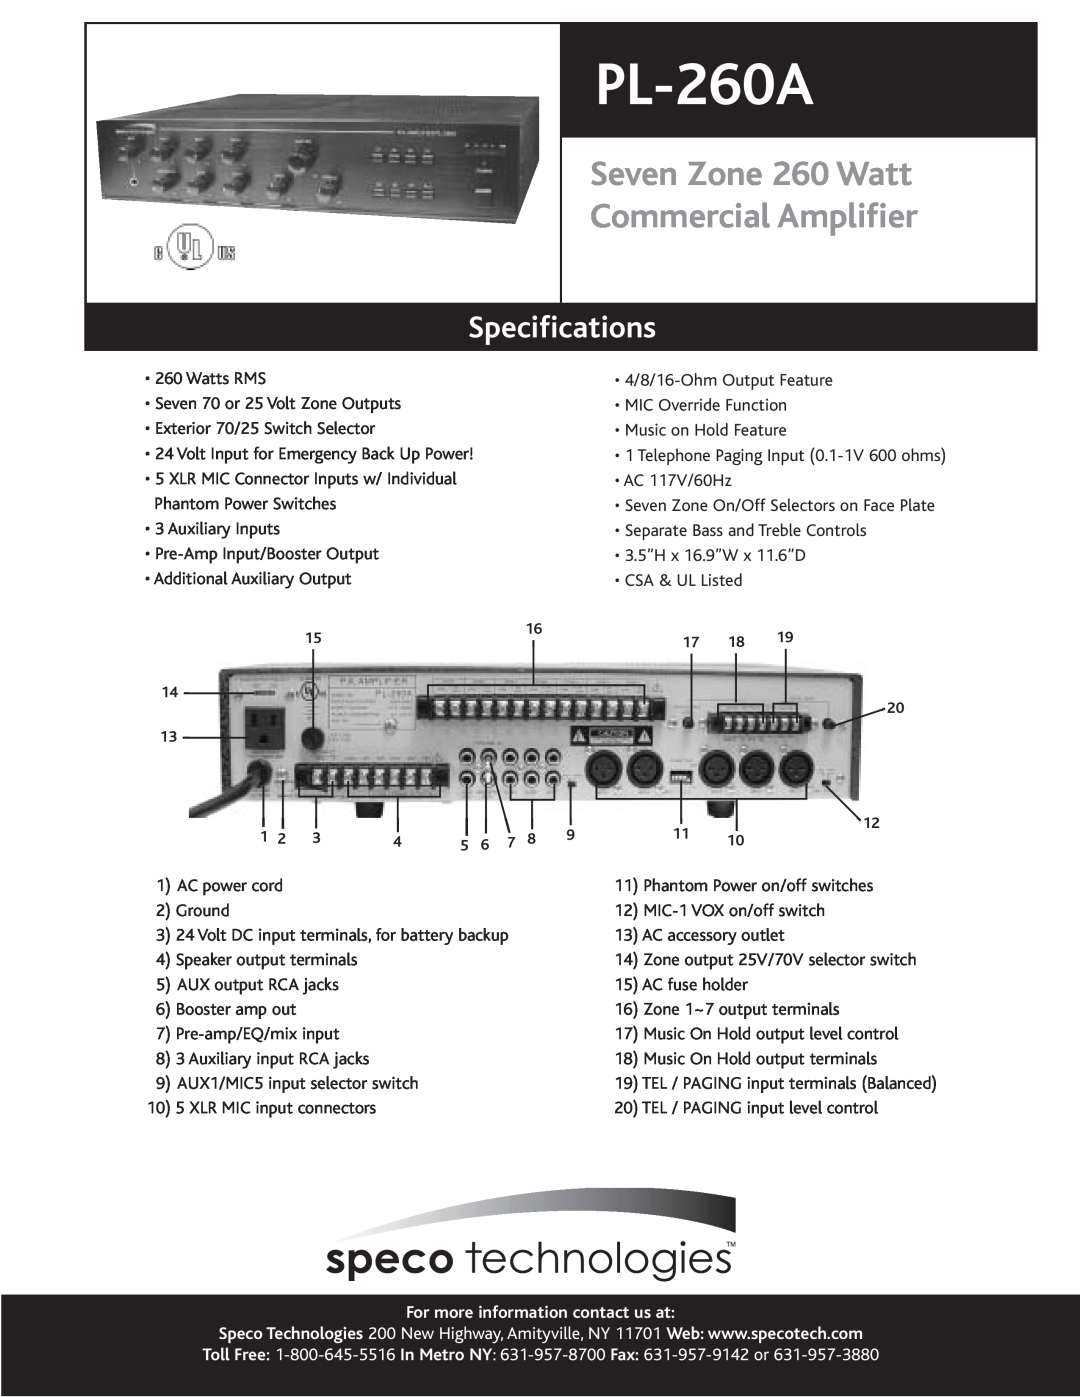 Speco Technologies PL-260A Seven Zone 260 Watt Commercial Amplifier, Specifications, For more information contact us at 